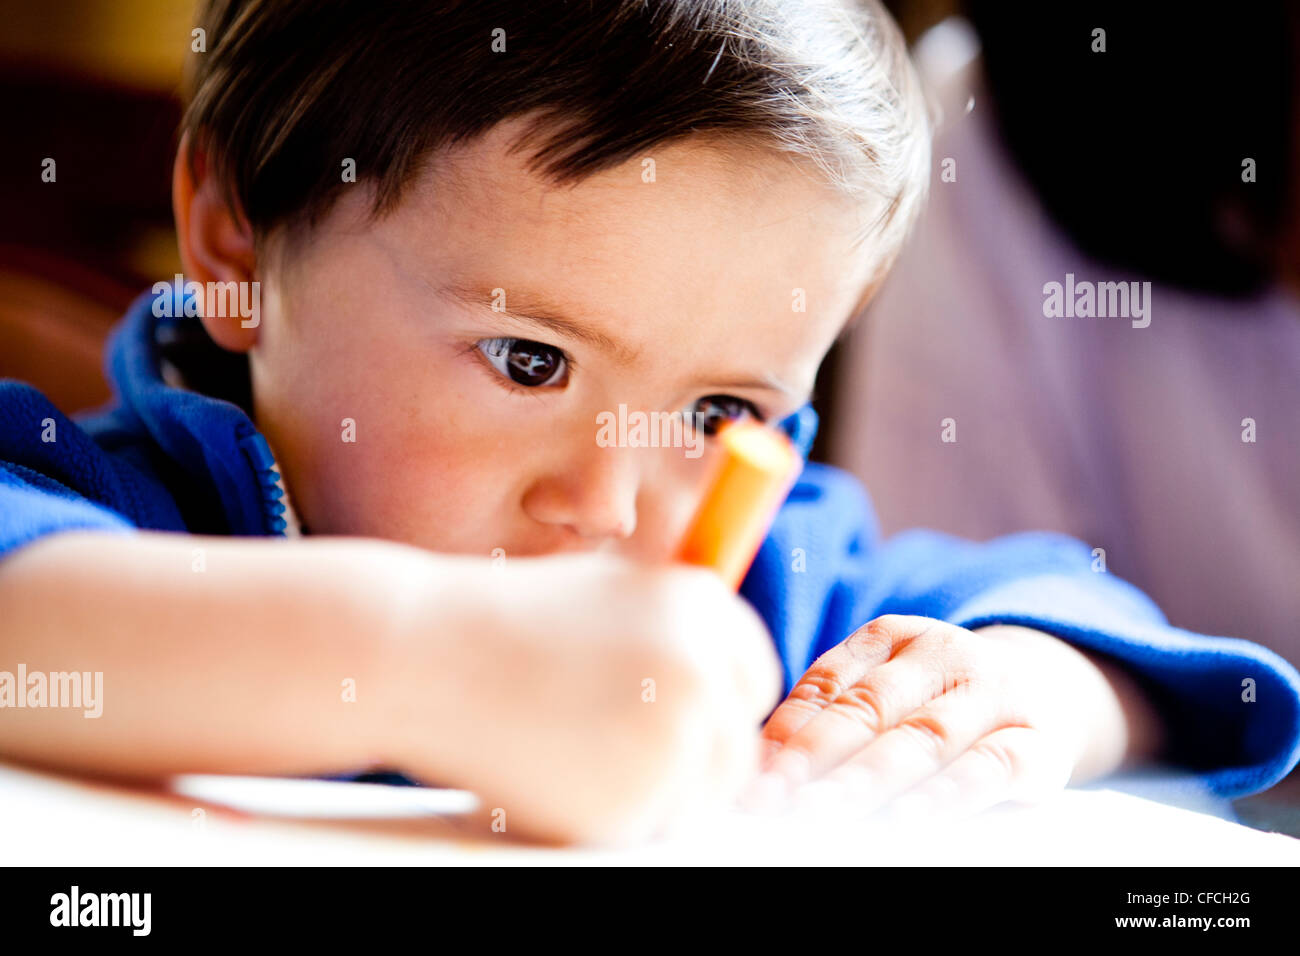 a 2 year old boy drawing Stock Photo